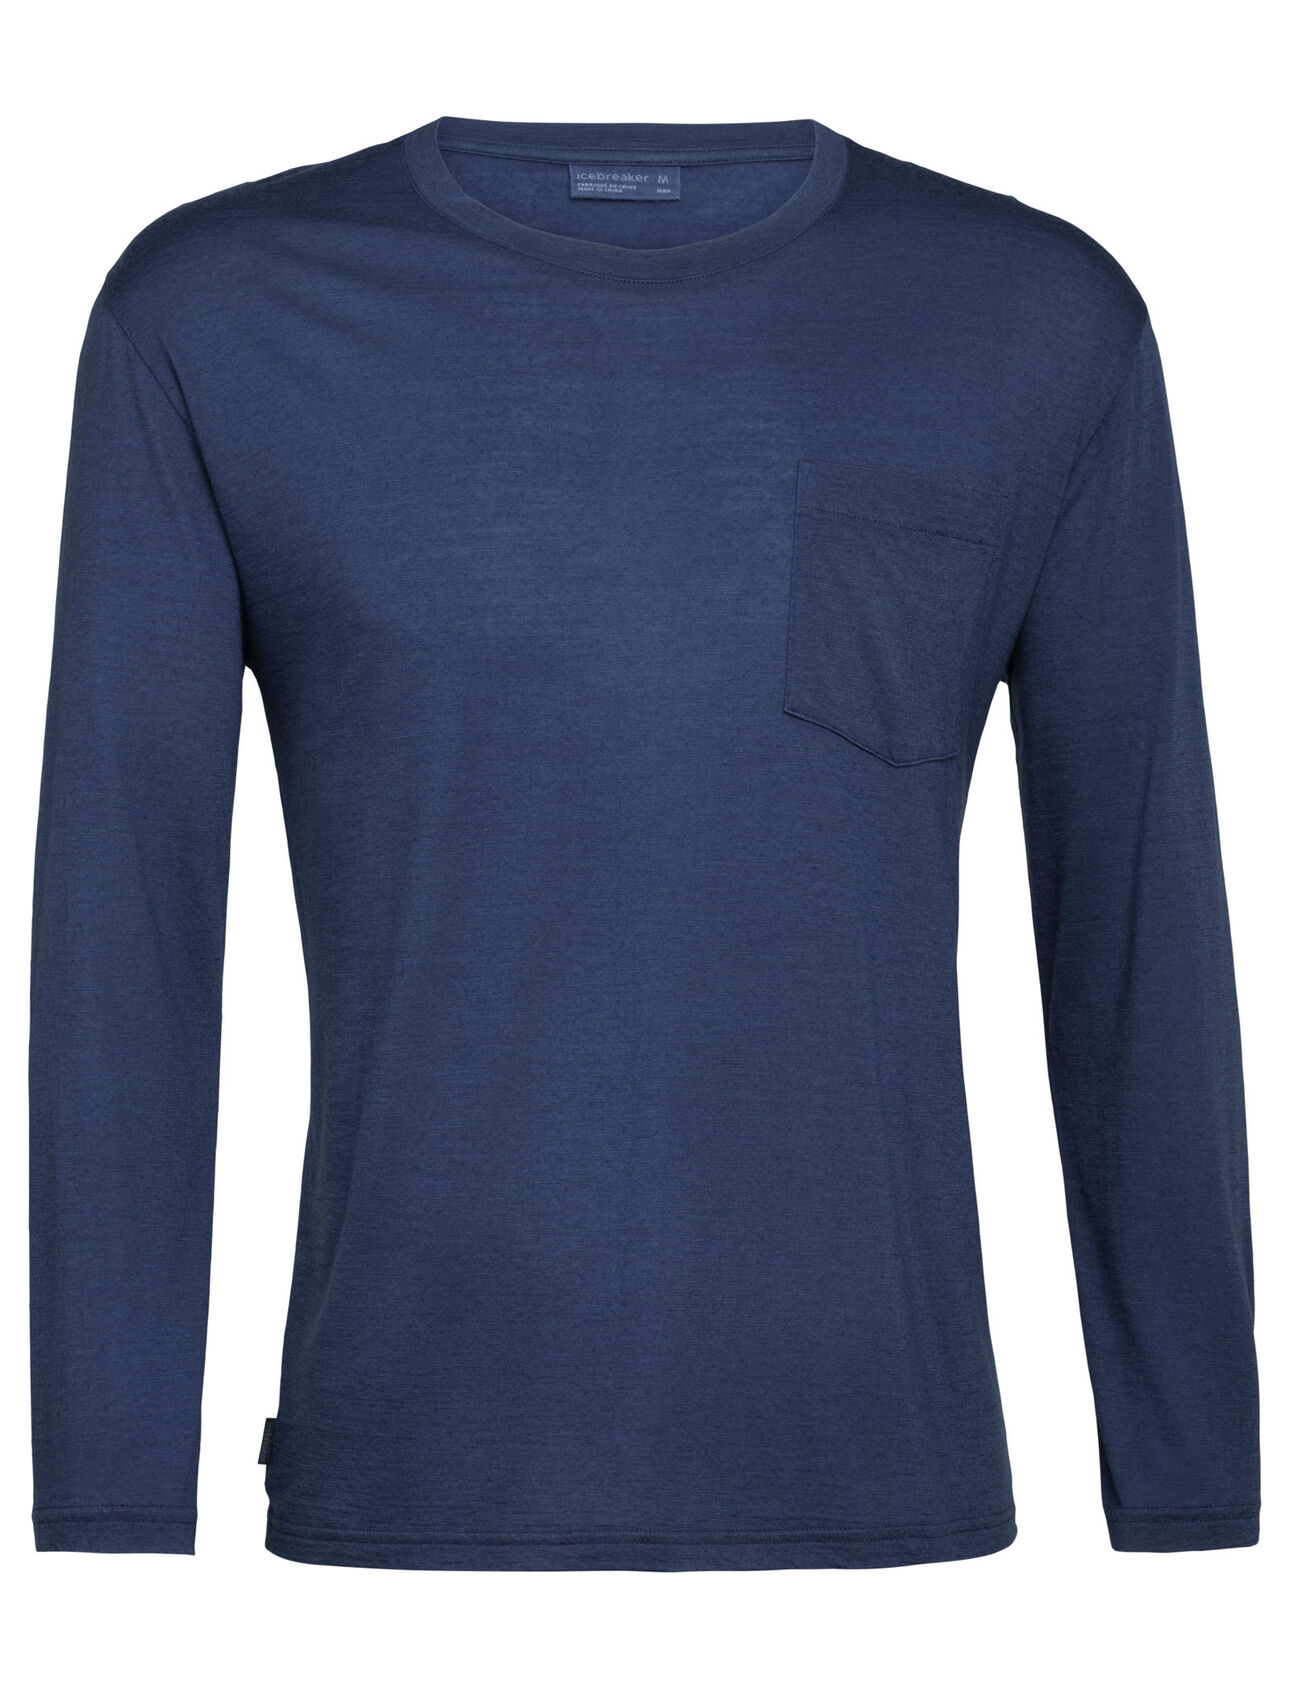 Mens Nature Dye Merino Drayden Long Sleeve Pocket Crewe T-Shirt Featuring our highly breathable Cool-Lite™ fabric and dyed using natural, sustainably sourced plant pigments, the Nature Dye Drayden Long Sleeve Pocket Crewe is a casual yet conscious everyday T-shirt. 